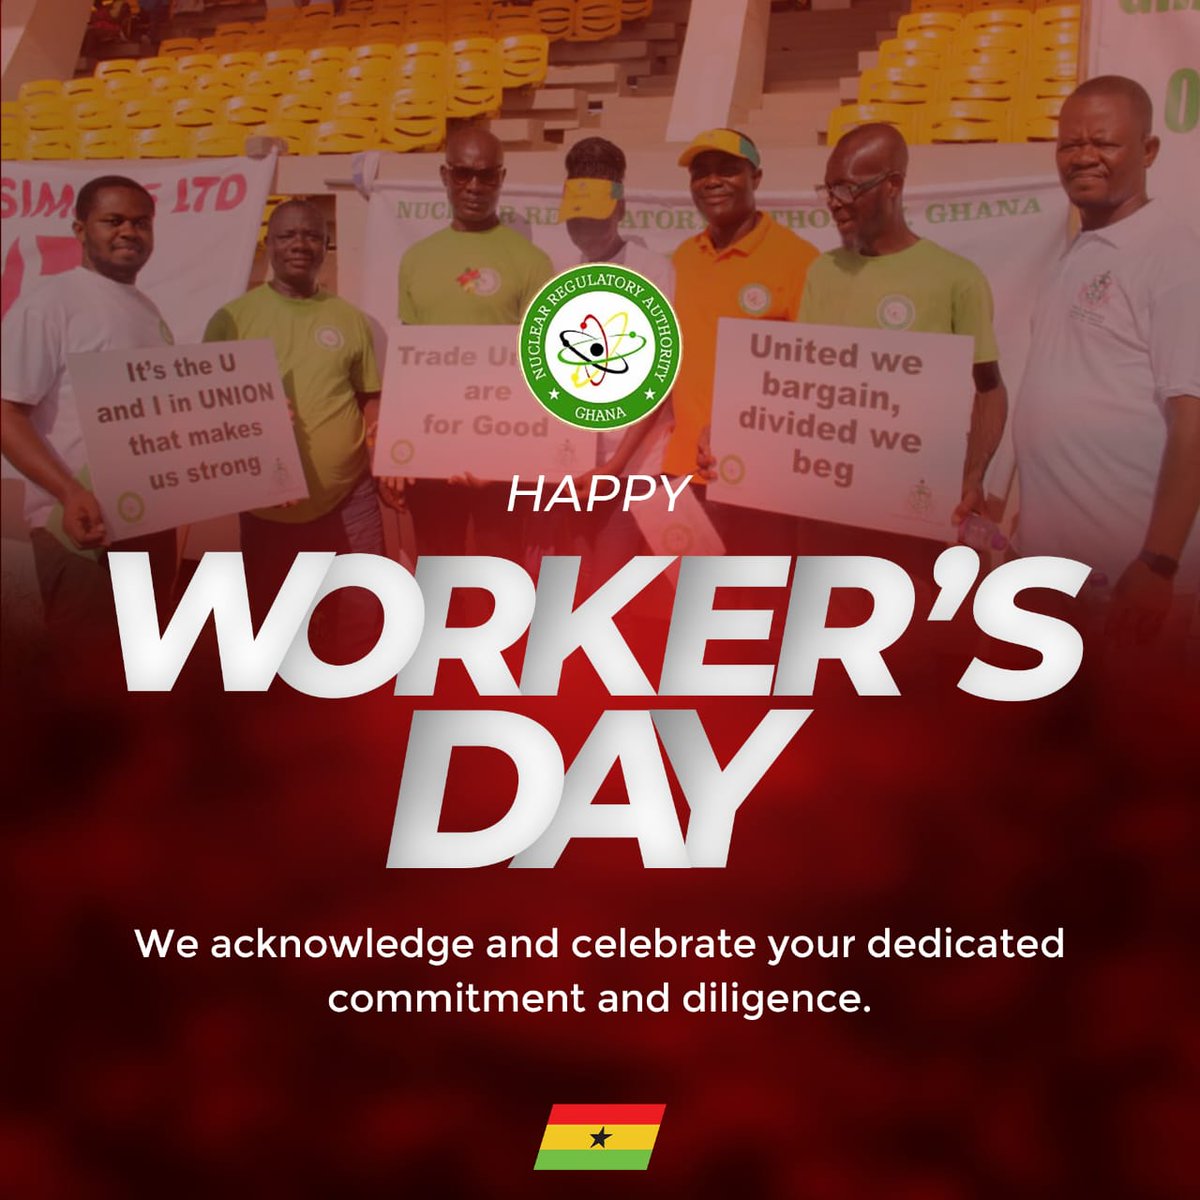 Happy Worker's Day!!!
#NRAGhana, #protectingpeopleandtheenvironment